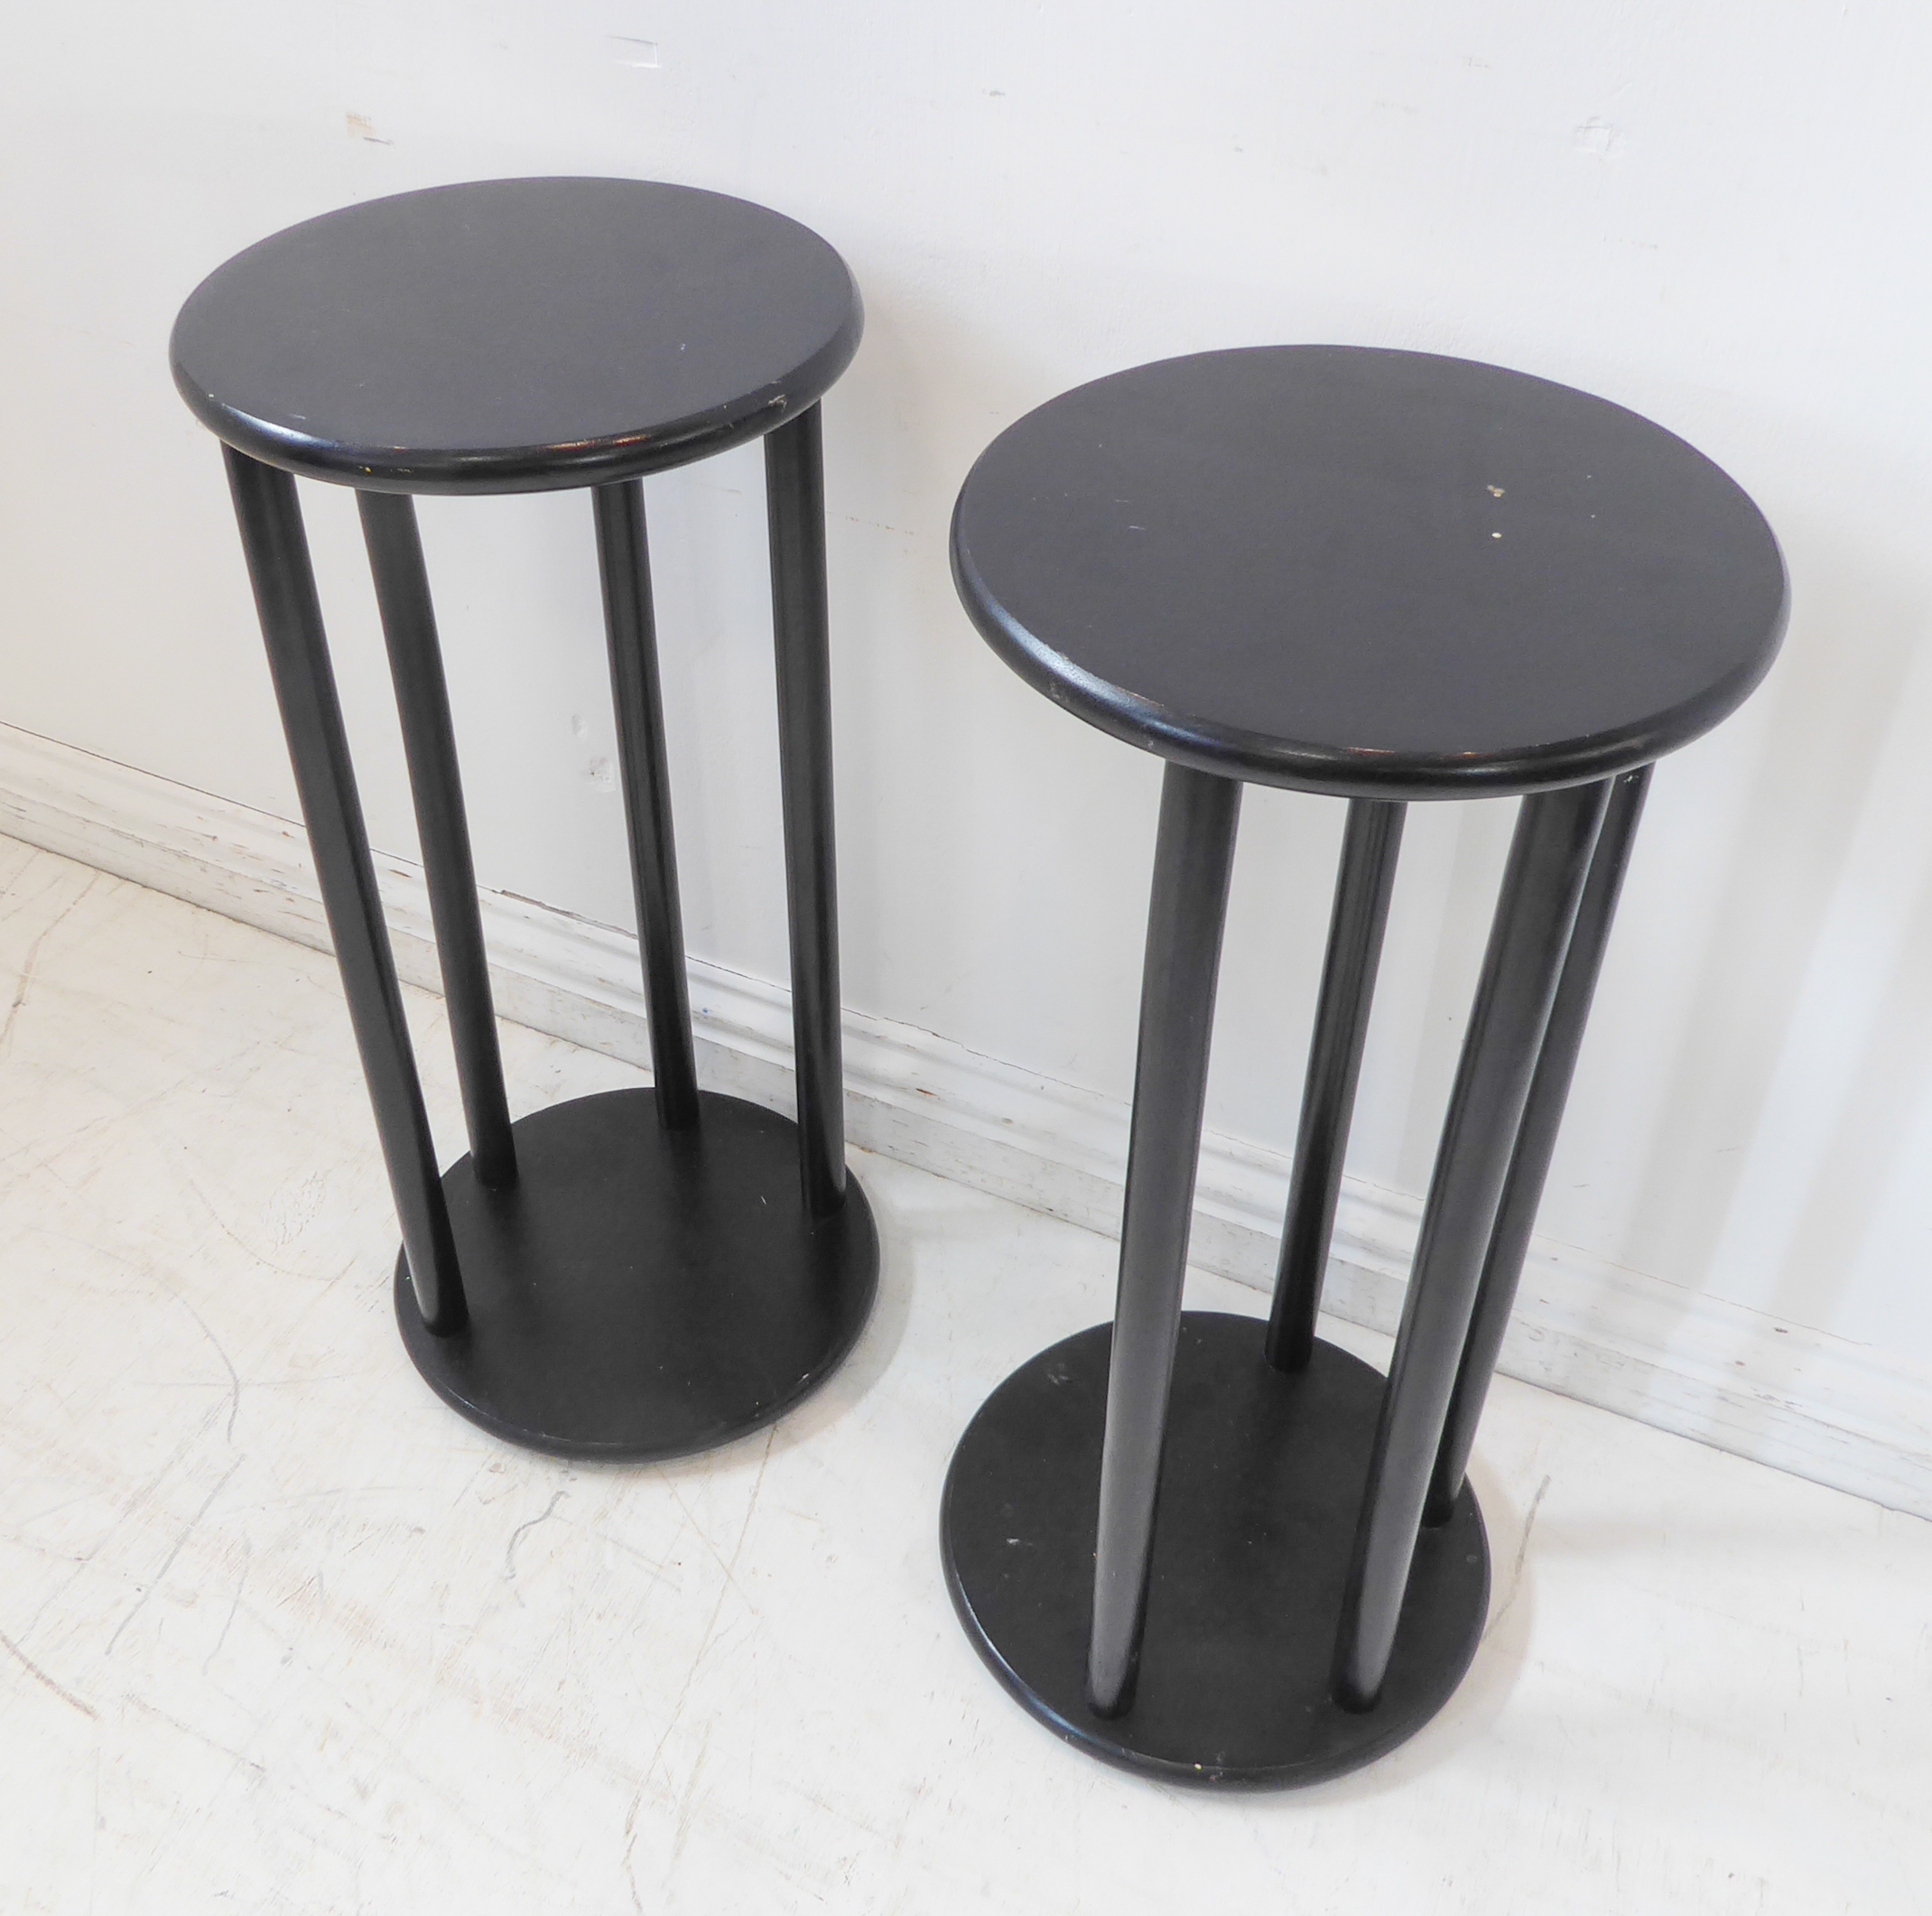 A pair of circular ebonised wooden stands (30cm diameter x 65cm high) - Image 2 of 3